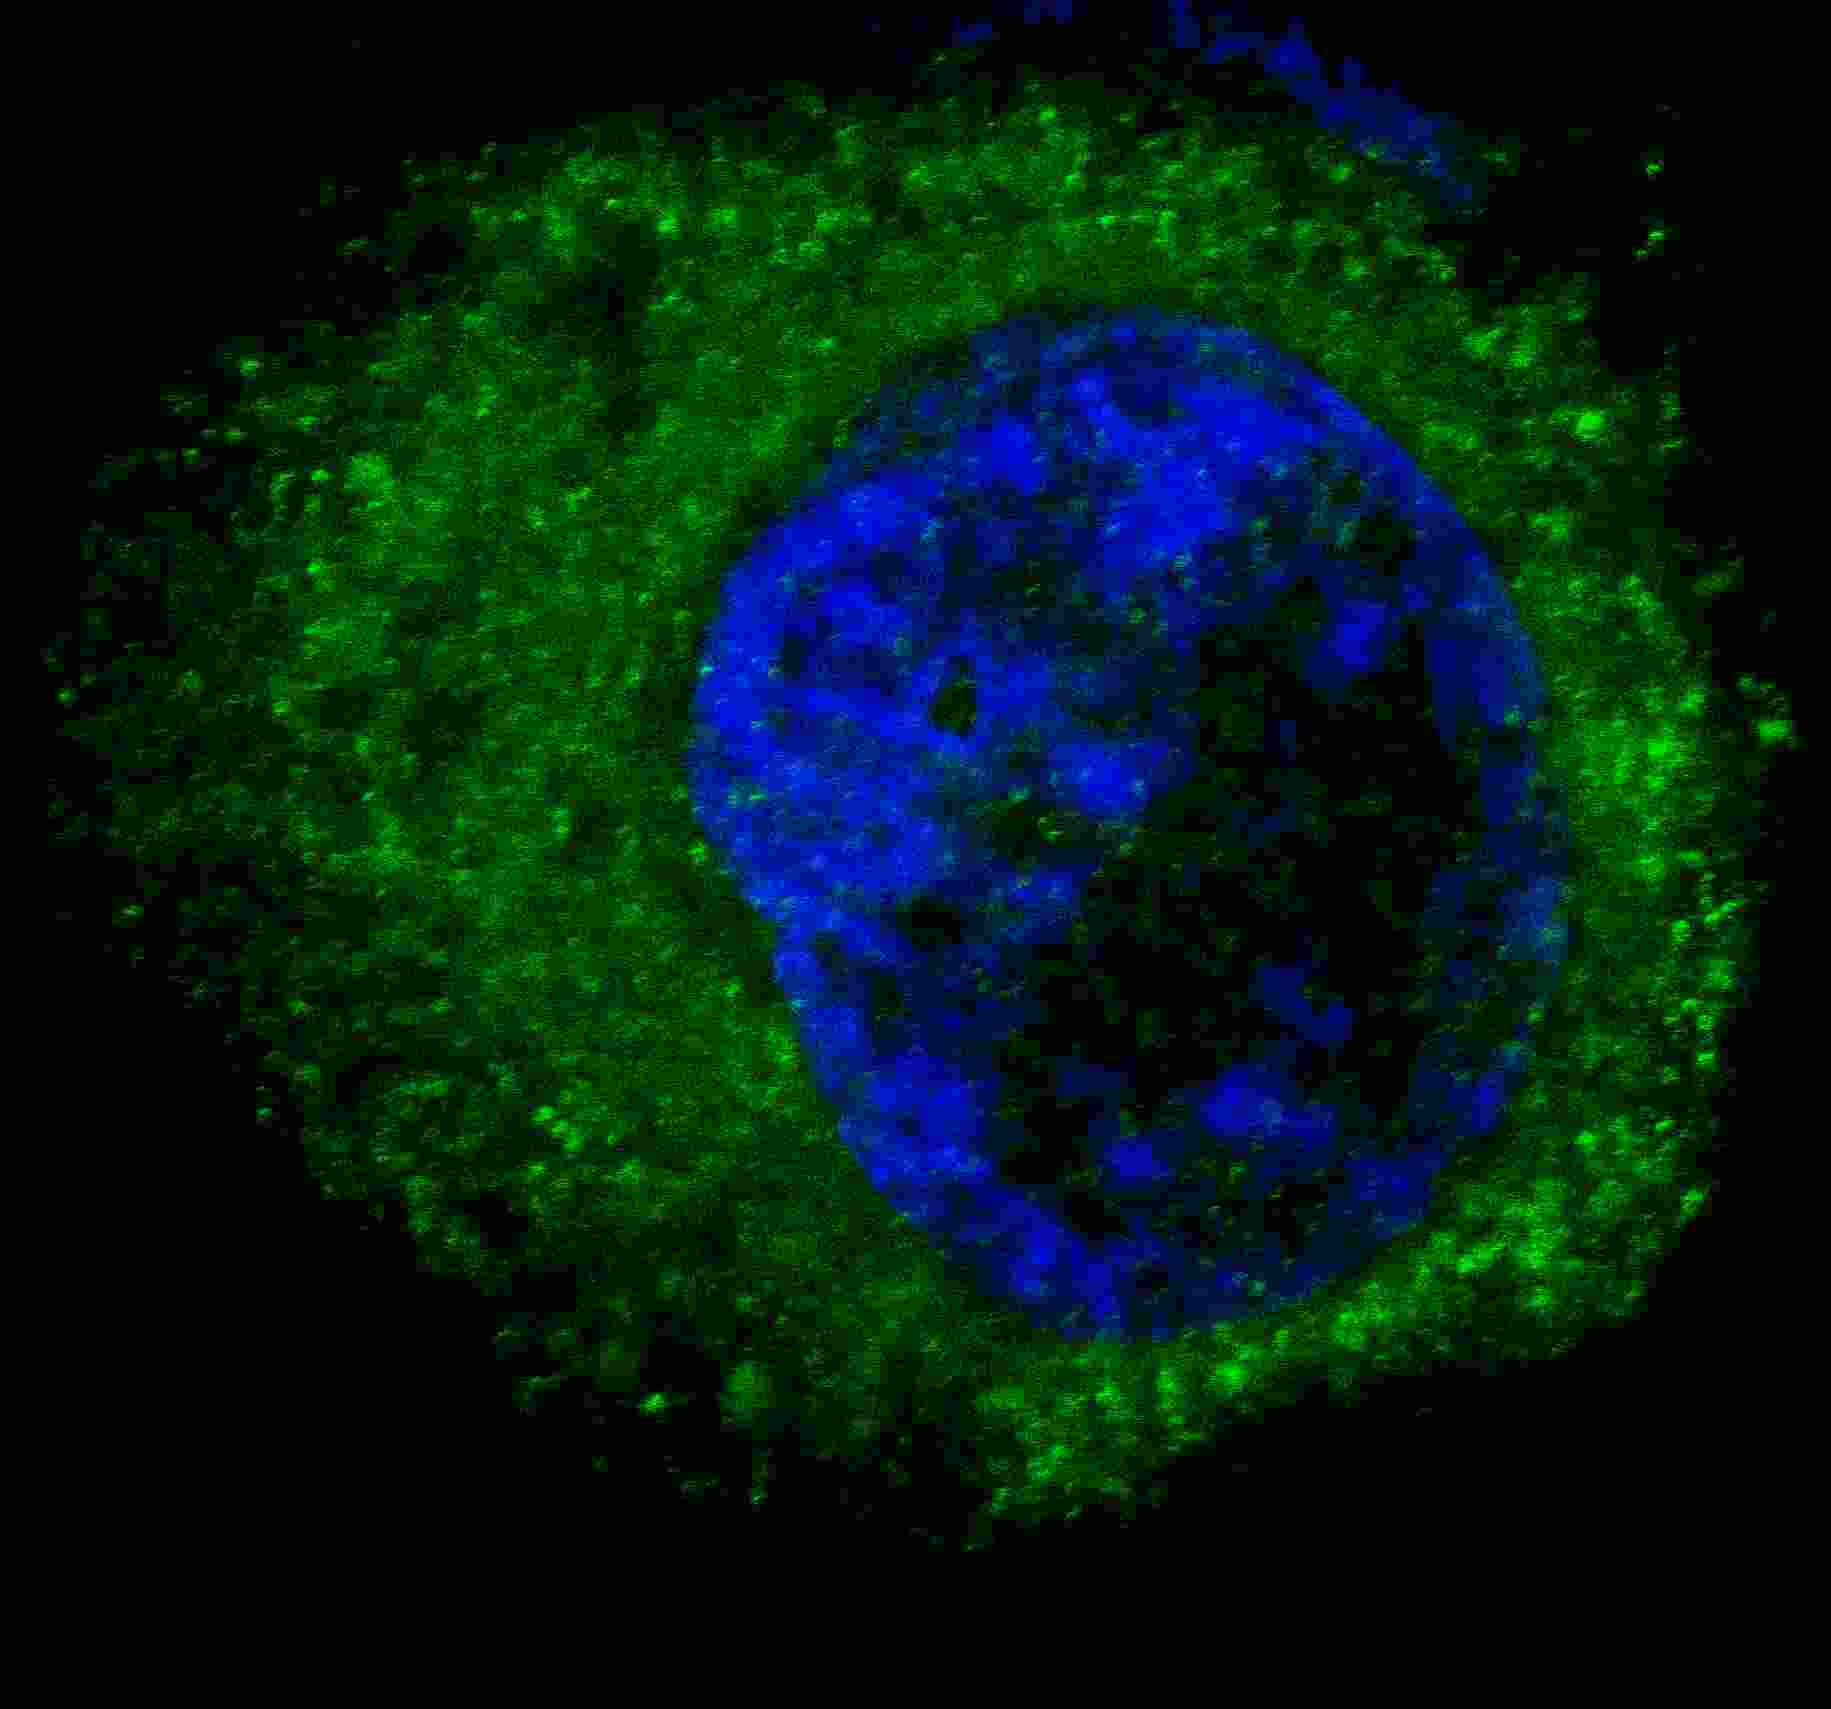 Fluorescent confocal image of HepG2 cells stained with MET/HGFR antibody. HepG2 cells were fixed with 4% PFA (20 min), permeabilized with Triton X-100 (0.2%, 30 min). Cells were then incubated with AM1005a MET/HGFR primary antibody (1:100, 2 h at room temperature). For secondary antibody, Alexa Fluor® 488 conjugated donkey anti-mouse antibody (green) was used (1:1000, 1h). Nuclei were counterstained with Hoechst 33342 (blue) (10 μg/ml, 5 min). Note the highly specific localization of the MET immunosignal to the cytoplasm, supported by Human Protein Atlas Data (http://www.proteinatlas.org/ENSG00000105976).